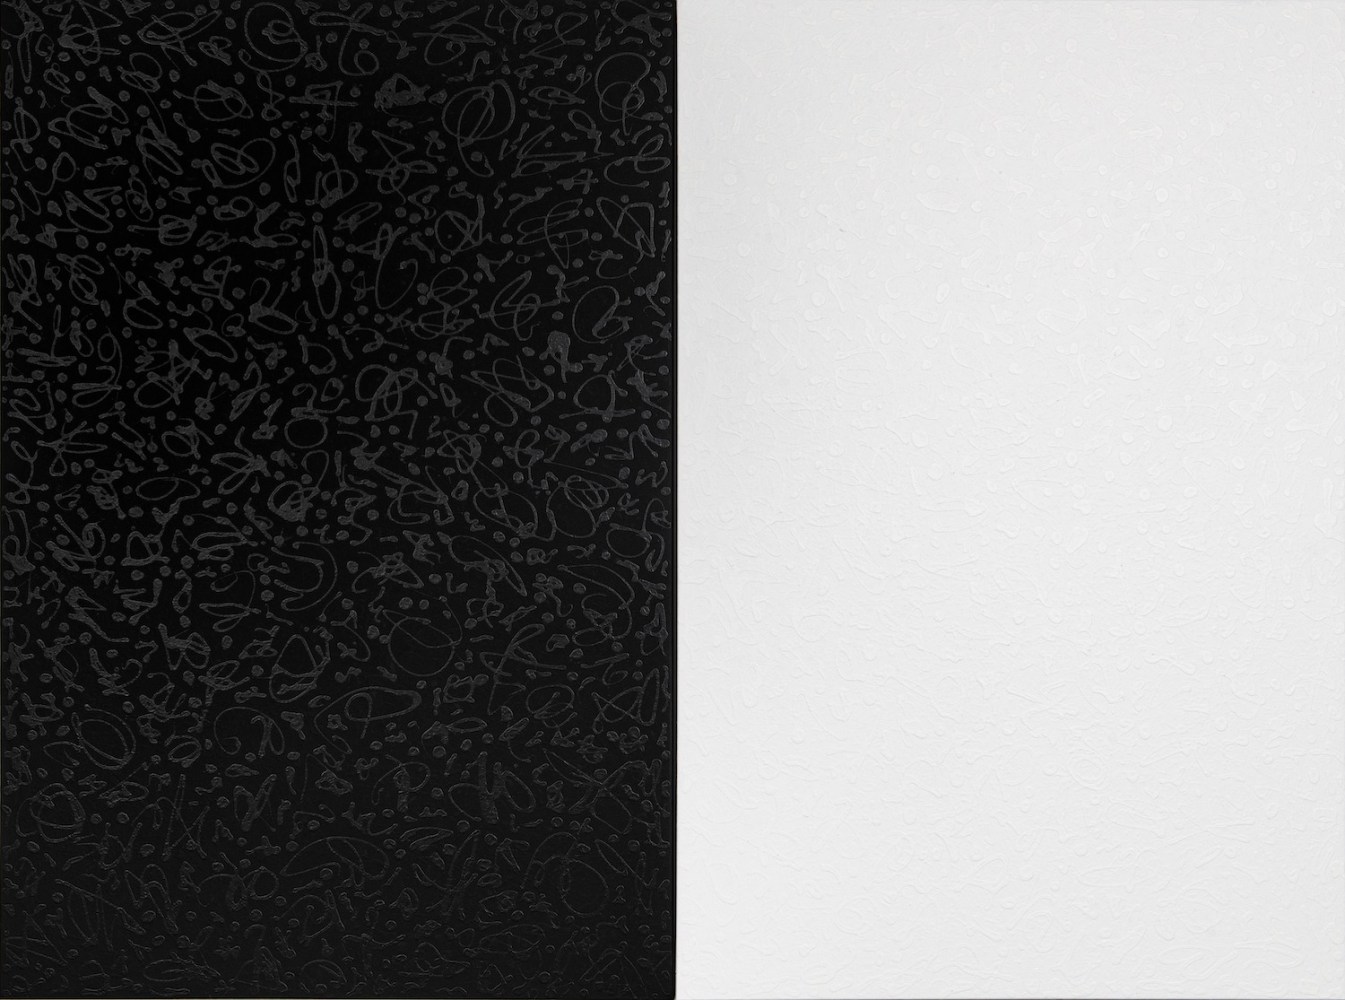 ROTRAUT (b. 1938)

Big Bang (diptych)

2019-2020

Acrylic, Gesso Mixed Media on Linen Canvas

72 x 96 inches